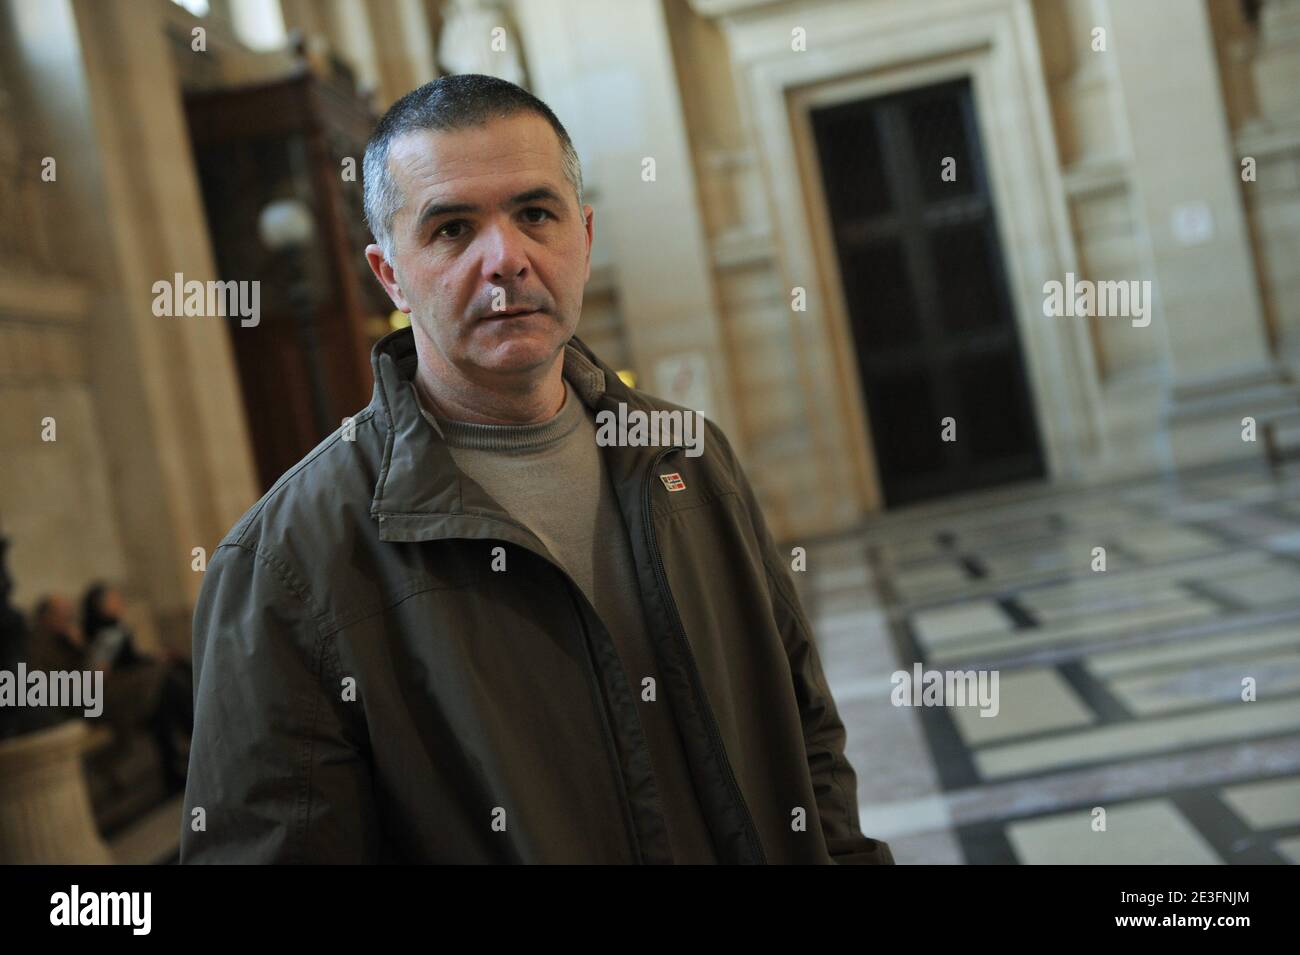 Stephane Colonna, brother of Yvan Colonna, arrives to the Paris courthouse to attend the Yvan Colonna Trial, in Paris, France, on March 16, 2009. Photo by Mousse/ABACAPRESS.COM Stock Photo